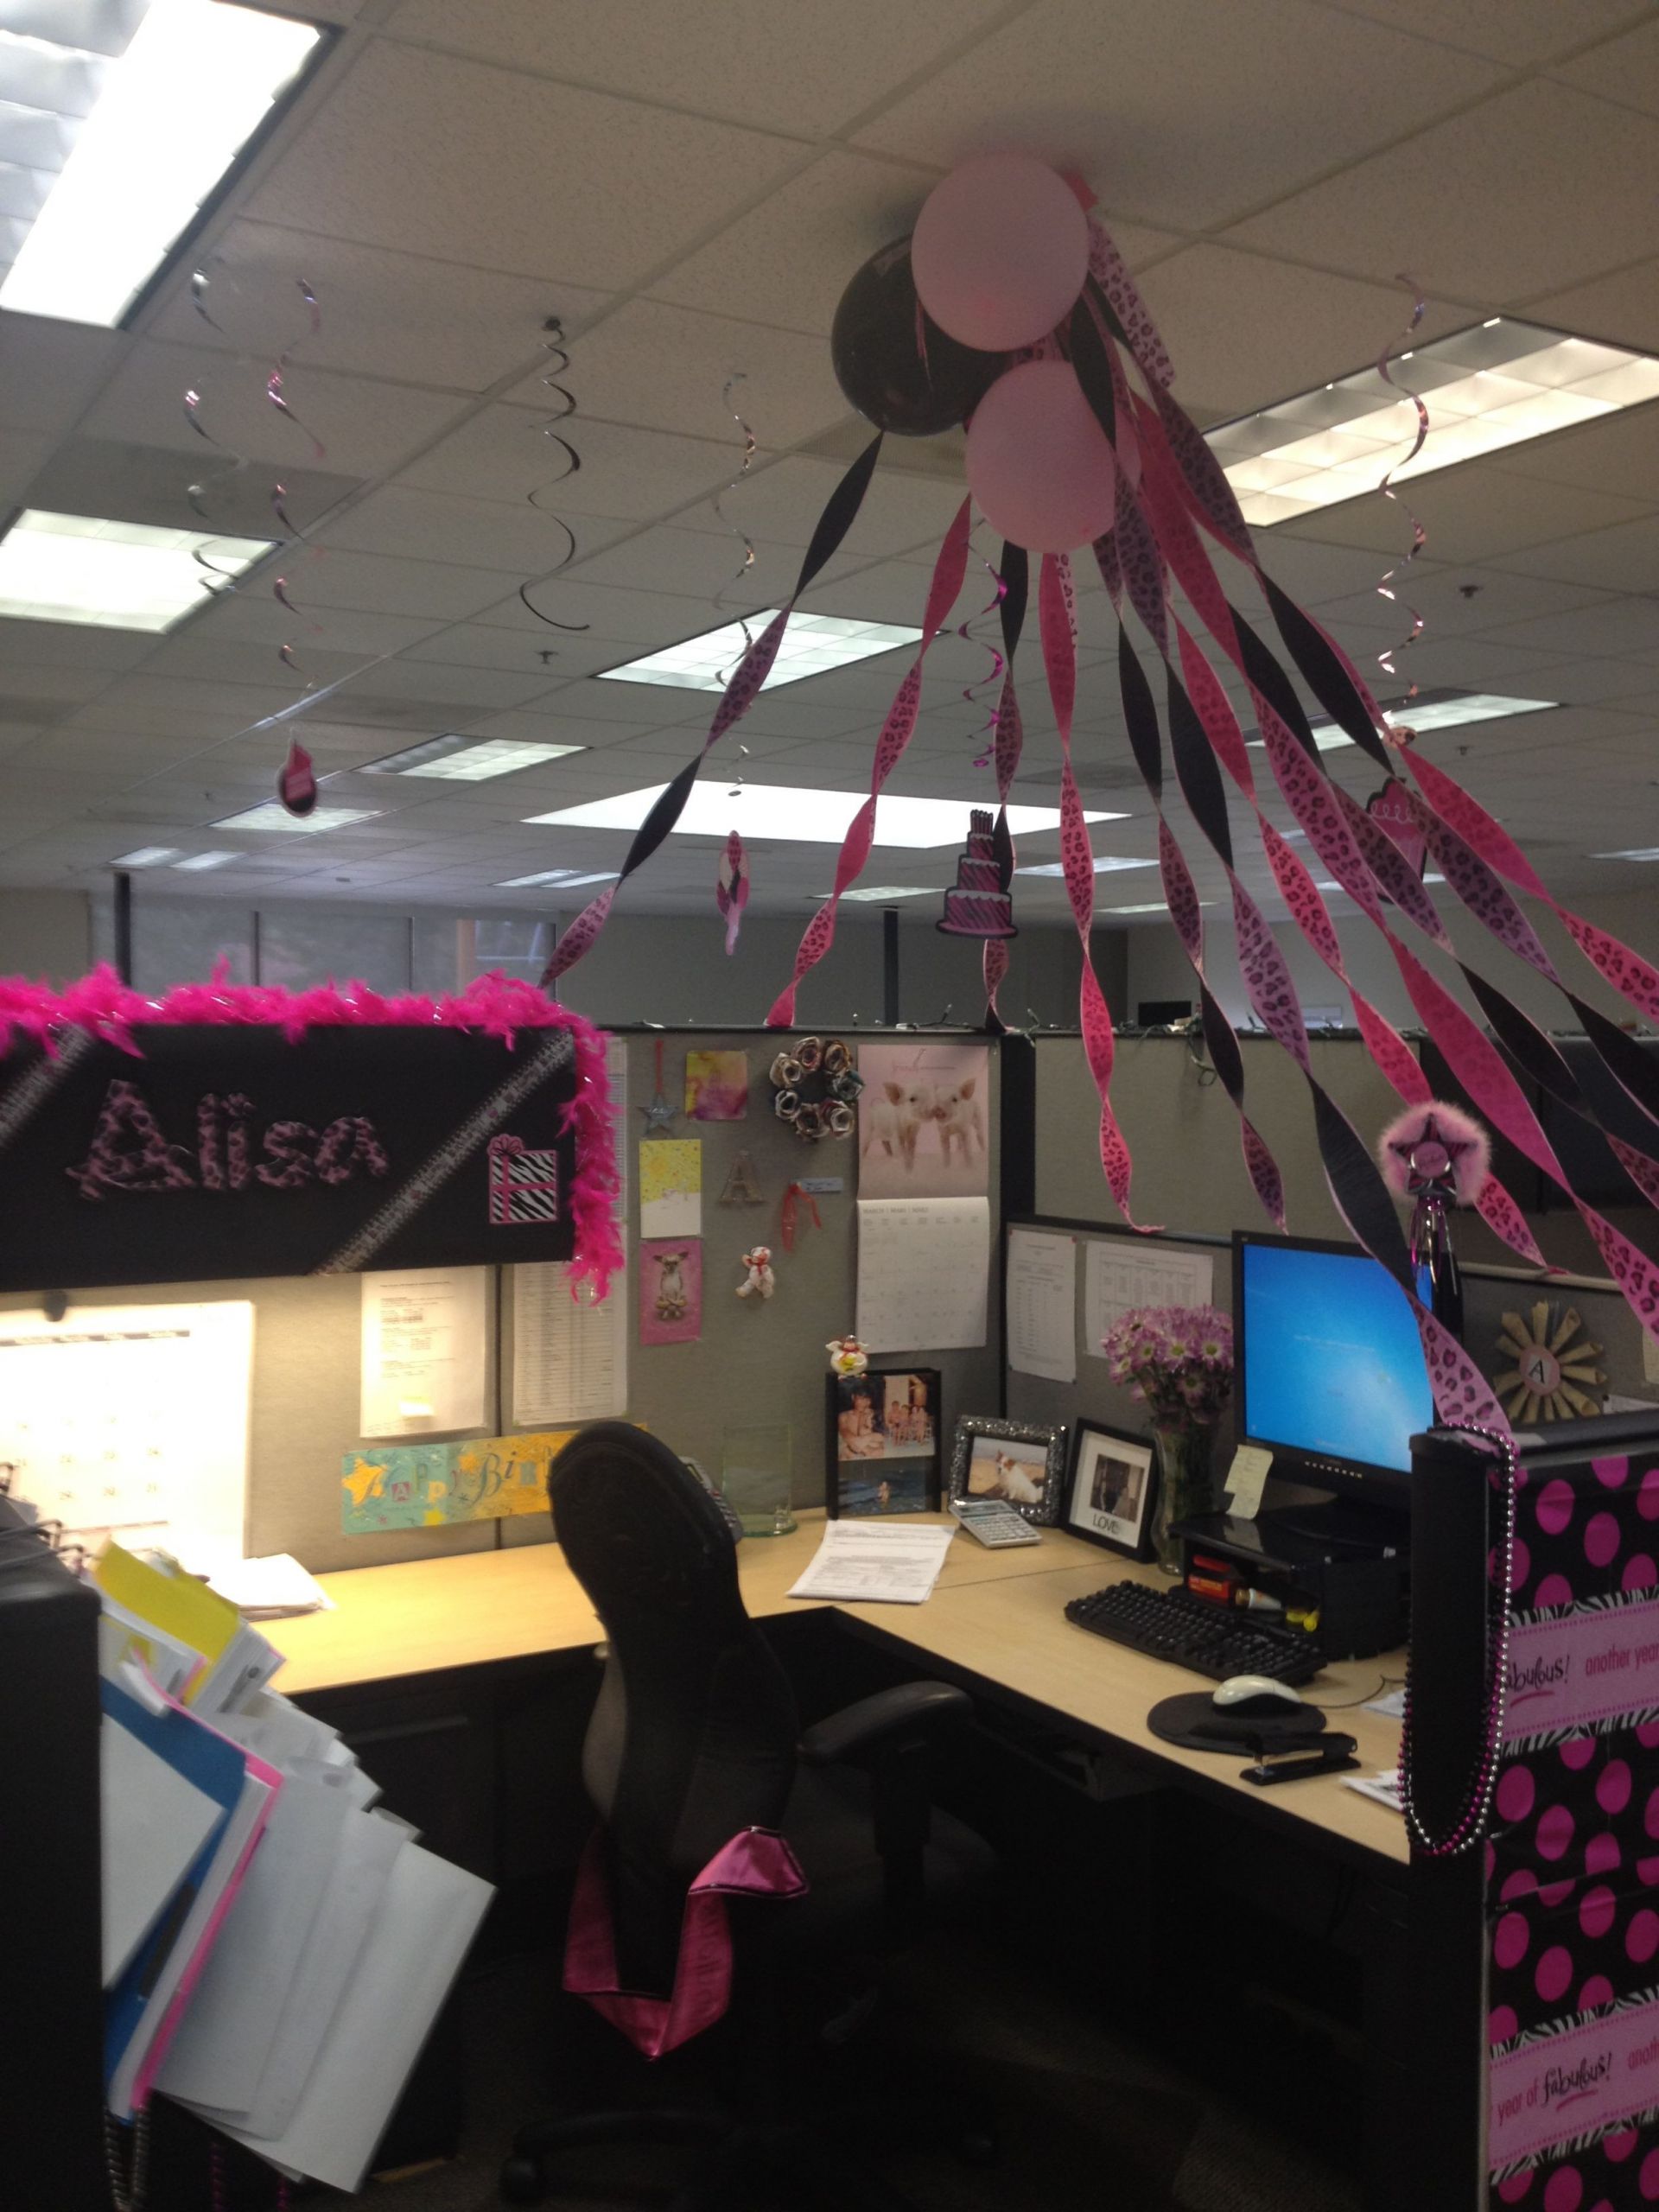 Birthday Cubicle Decorating Ideas
 Our office birthday tradition is to decorate cubicles to